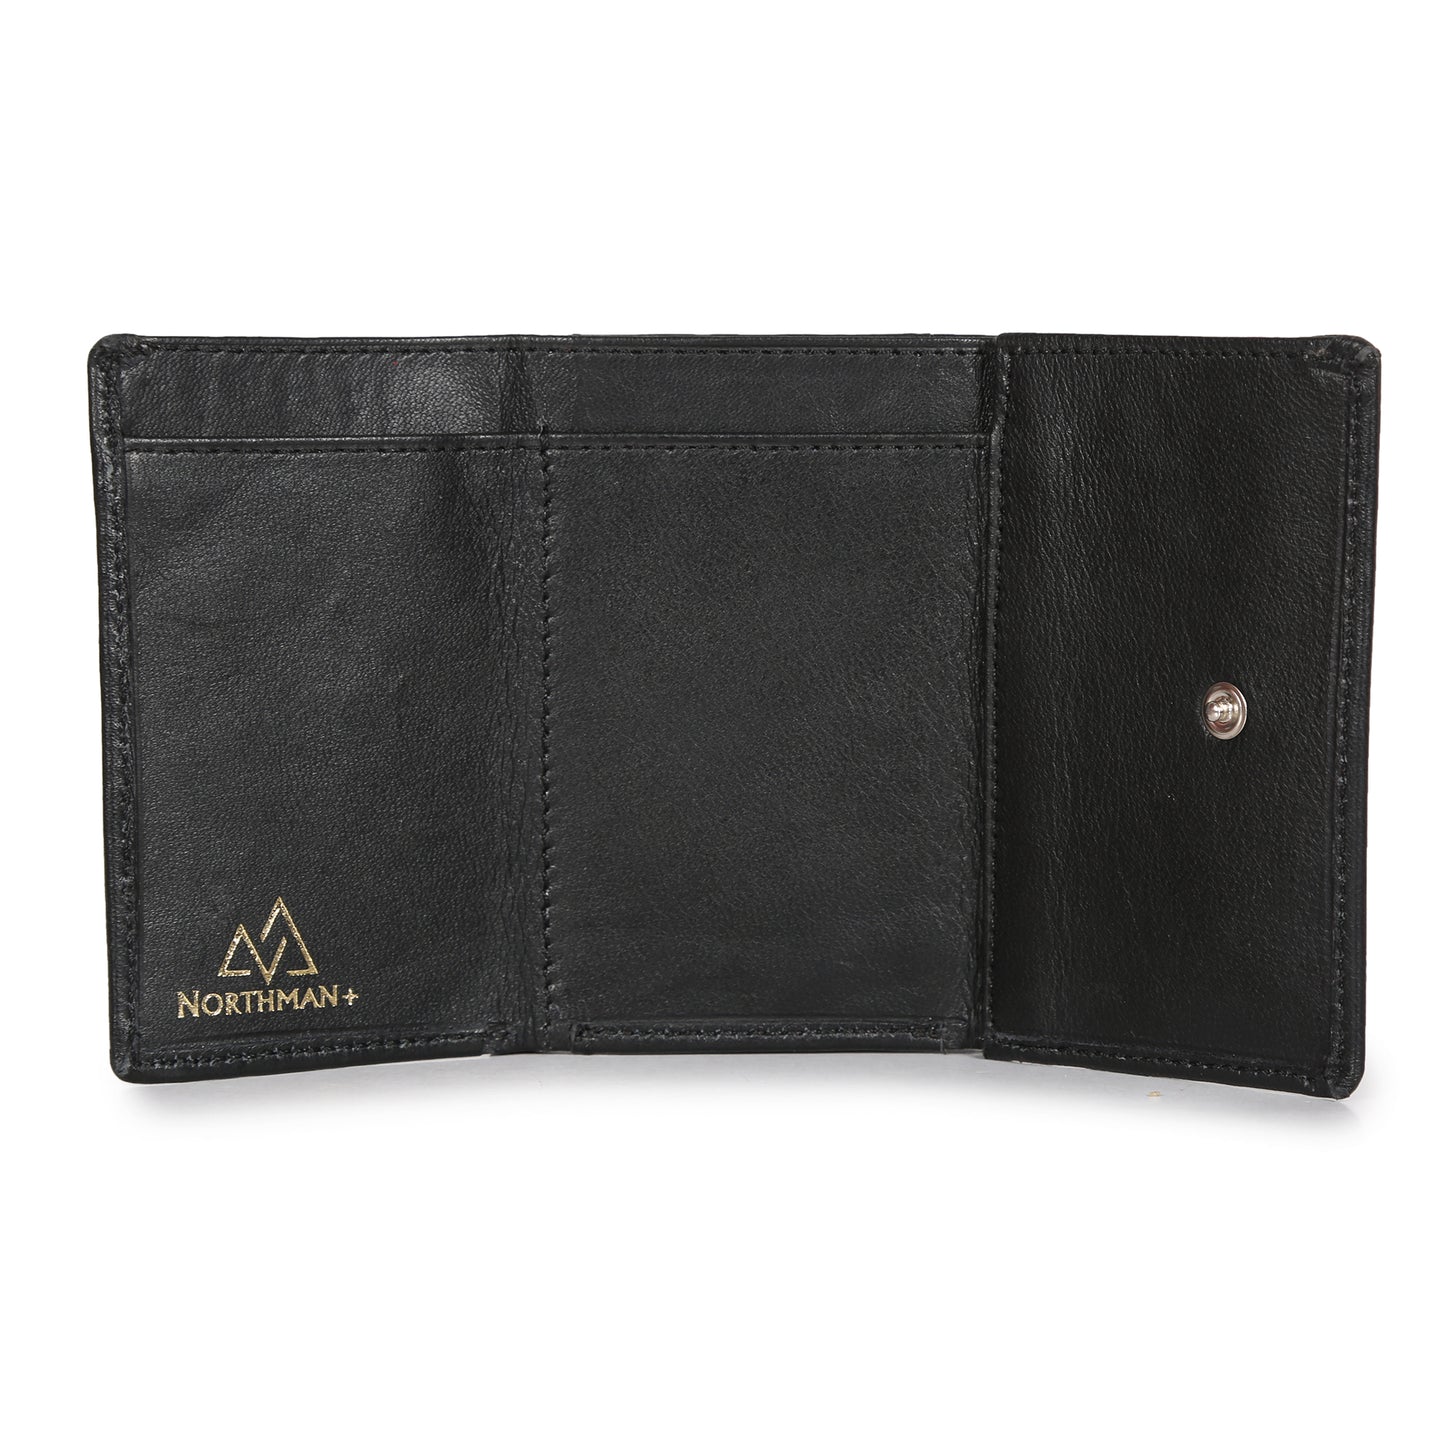 Card and Cash mini wallet in Black : The YBR series